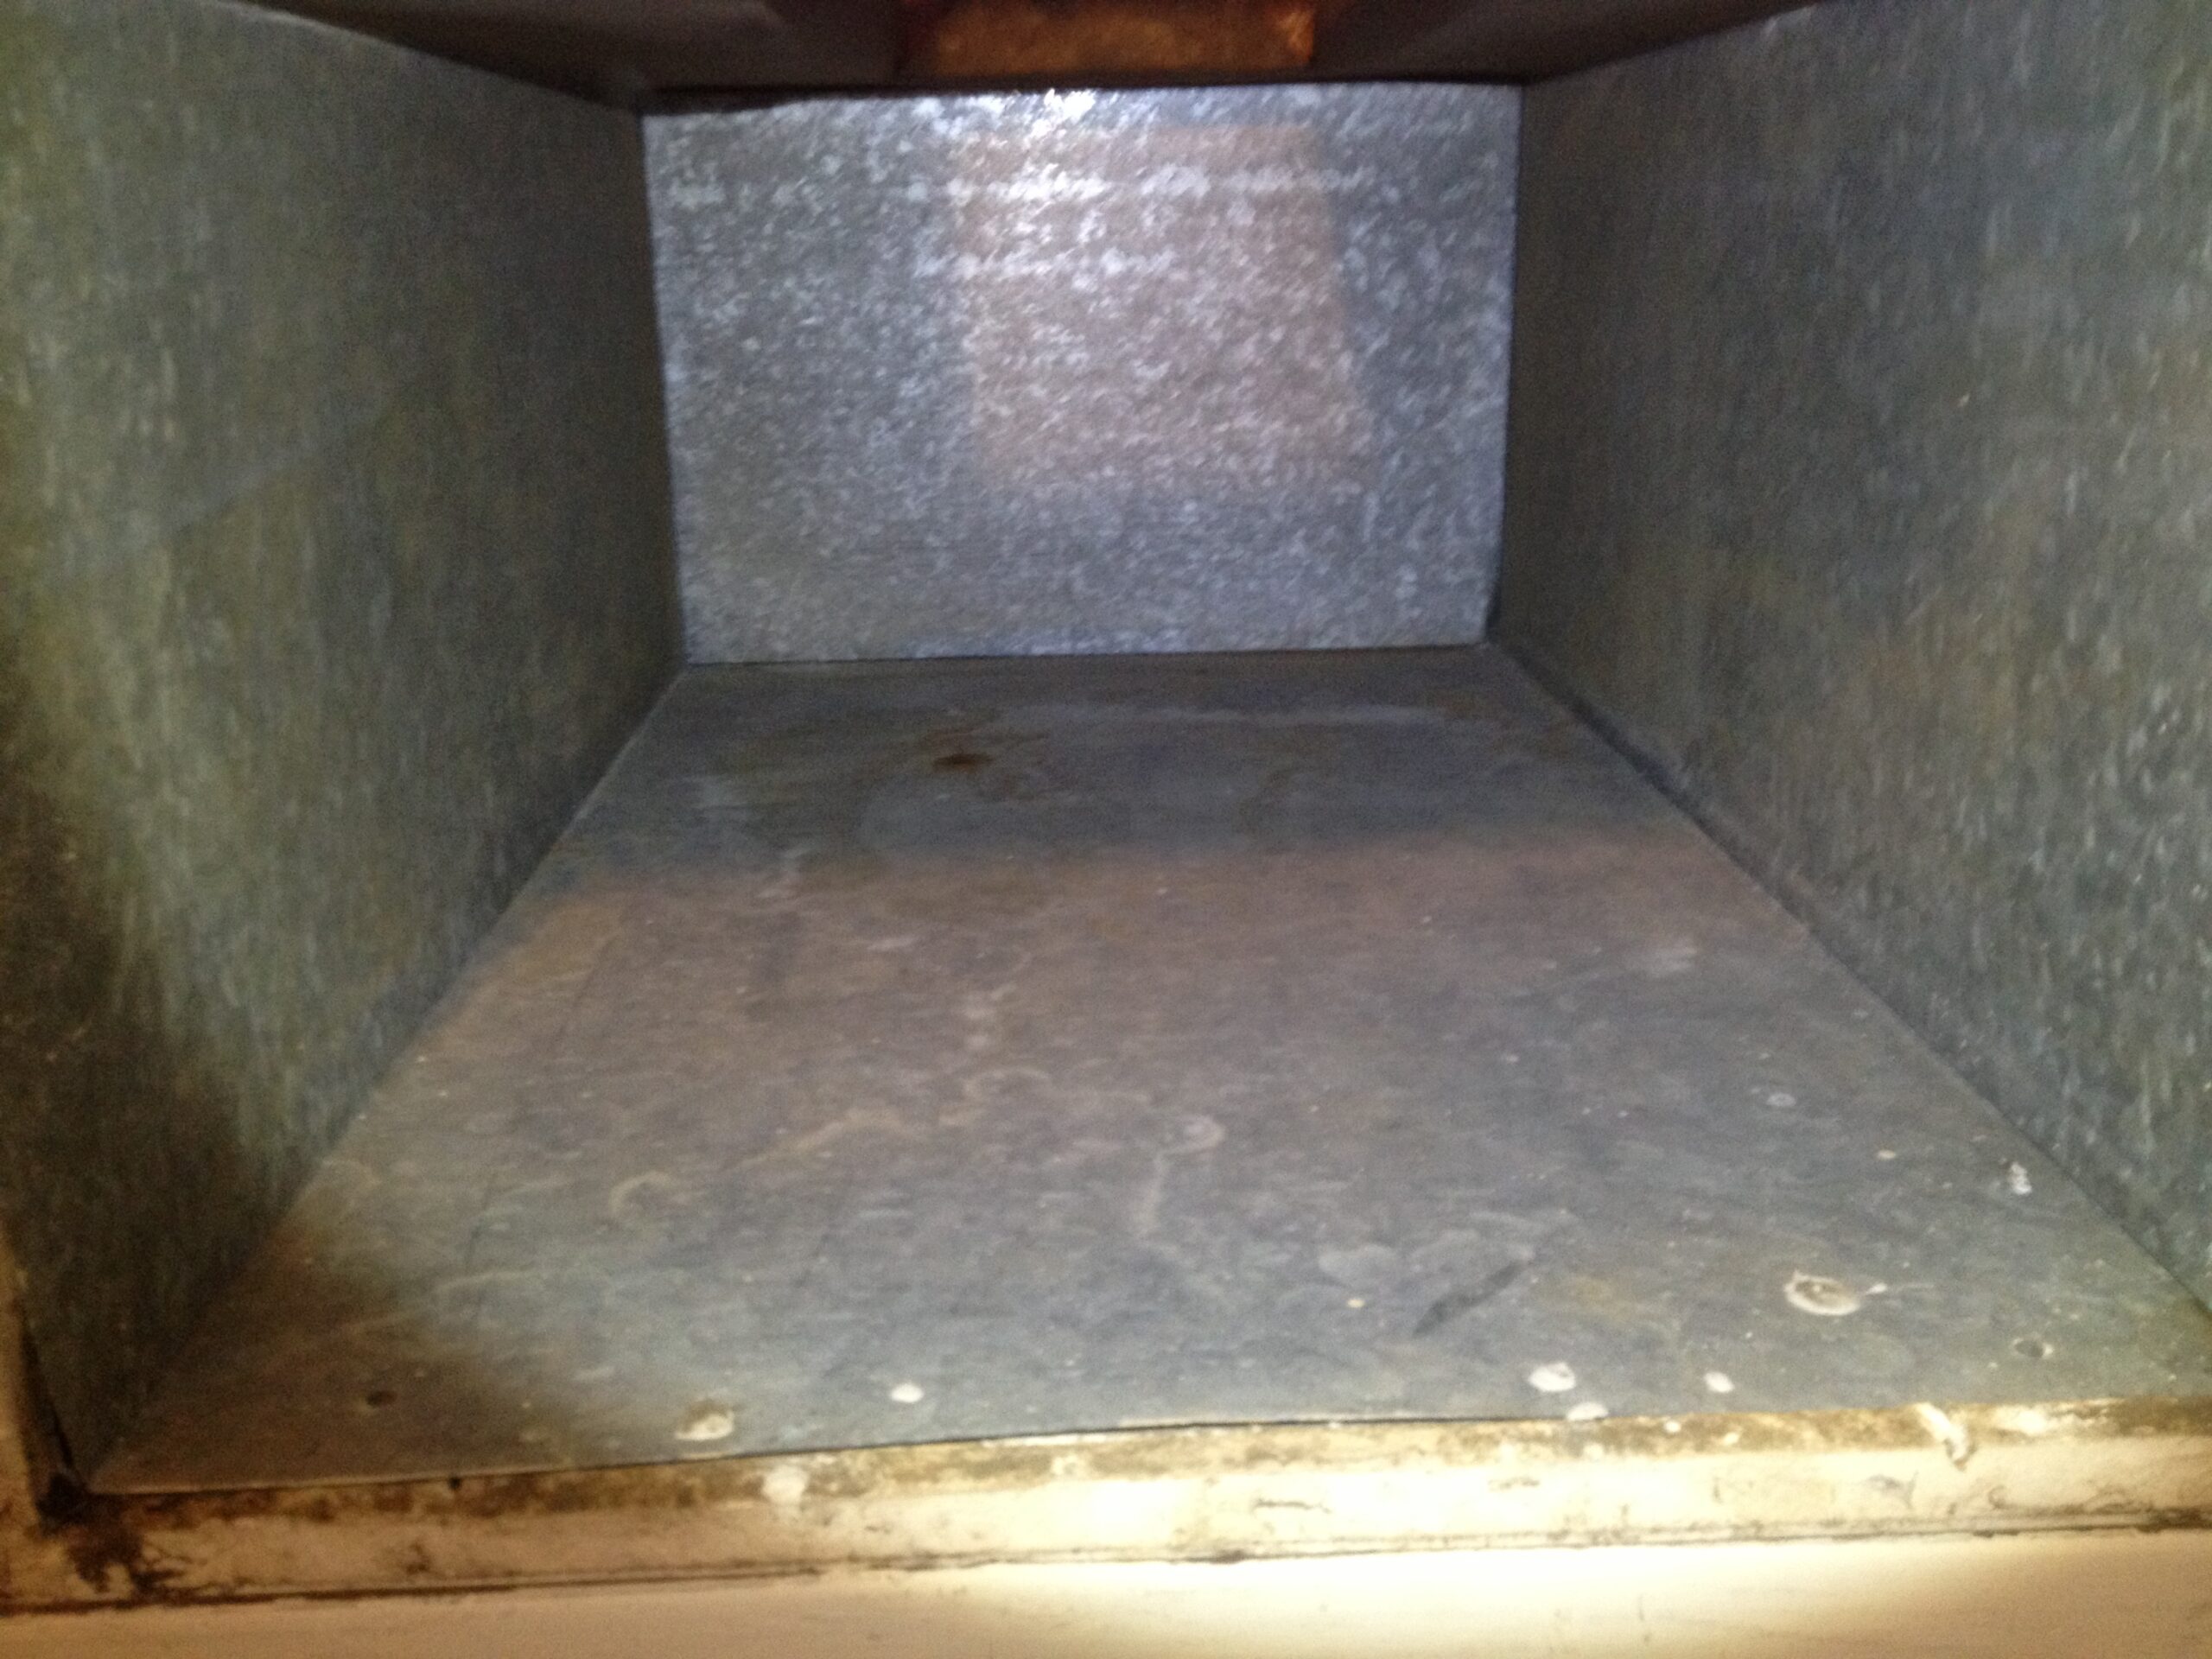 A/C Return Intake box after it has been cleaned by A-1 Duct Cleaning & Chimney Sweep in Orange County, CA